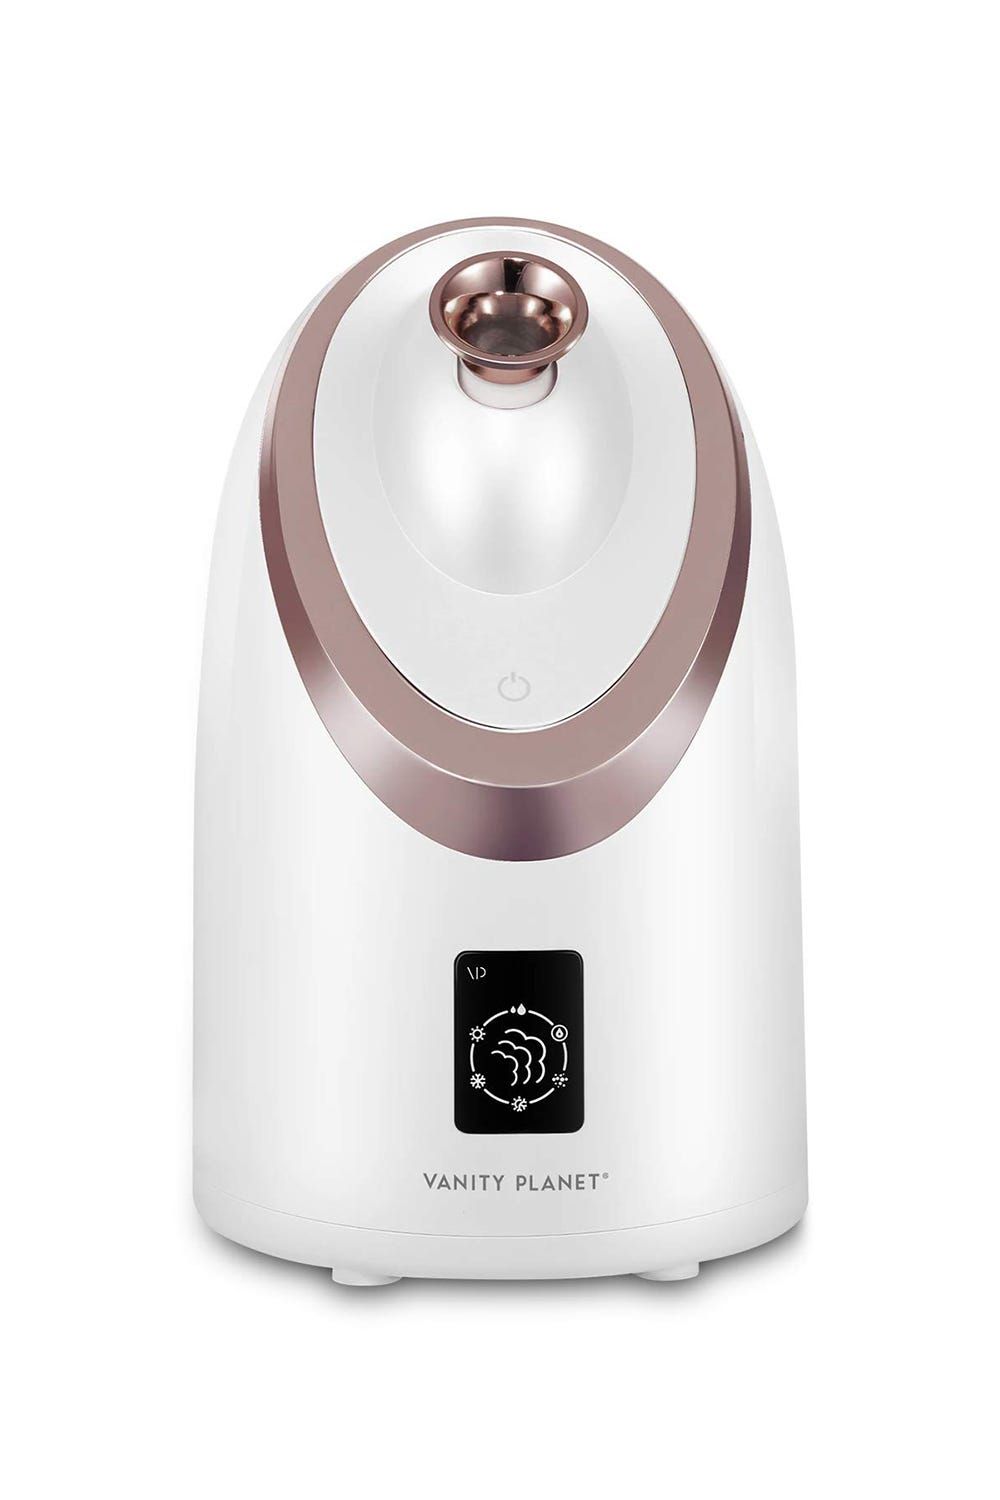 Vanity Planet Senia Hot and Cold Facial Steamer